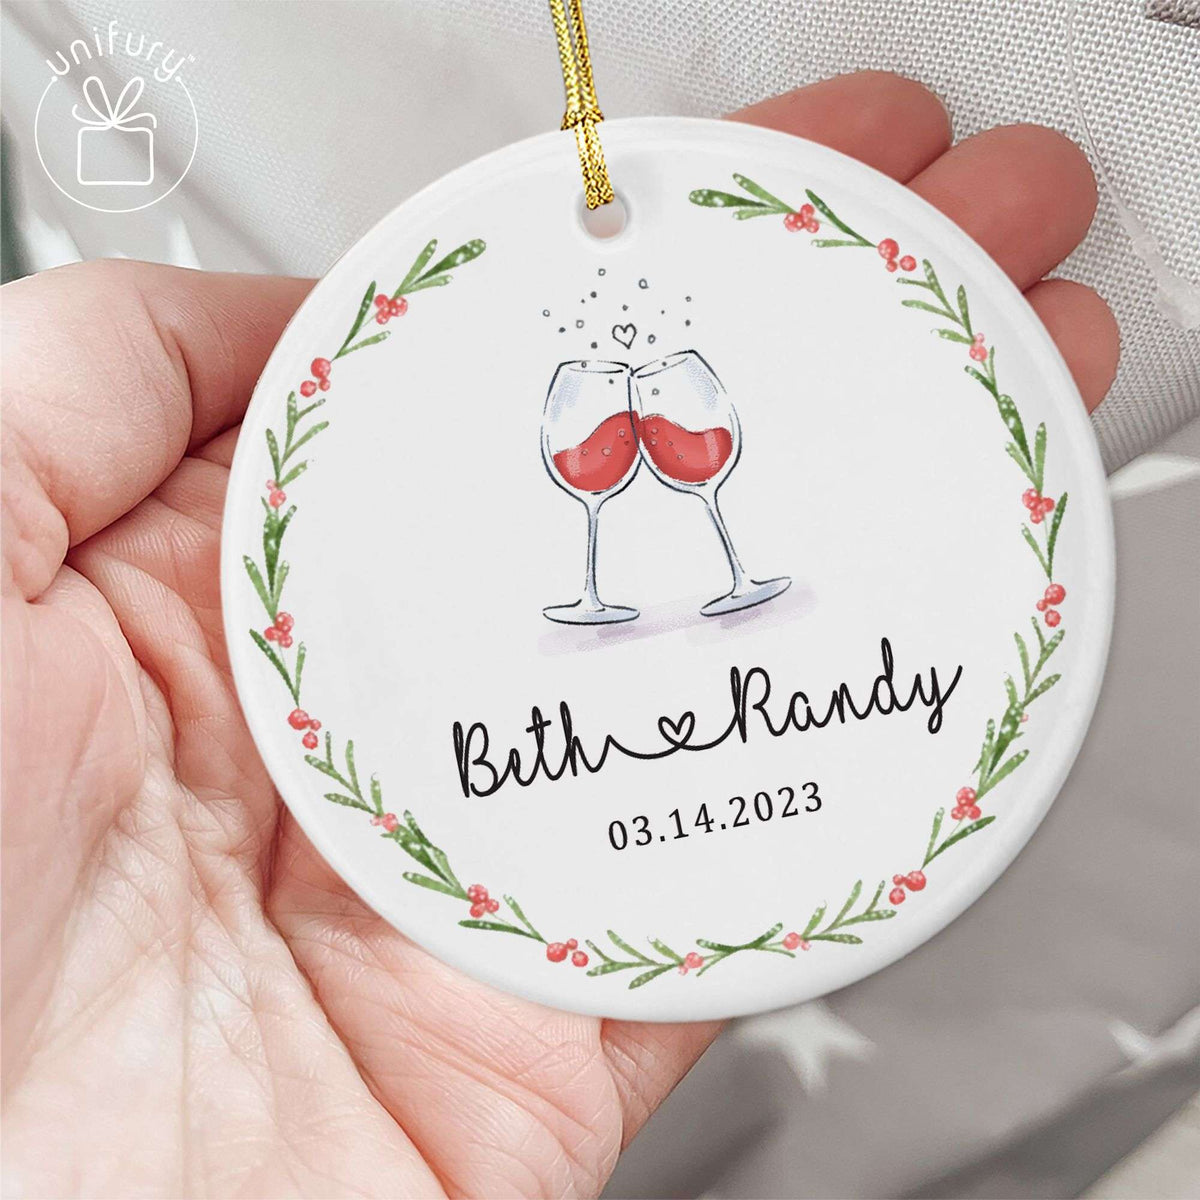 Married Basic Color Ceramic Circle Ornament